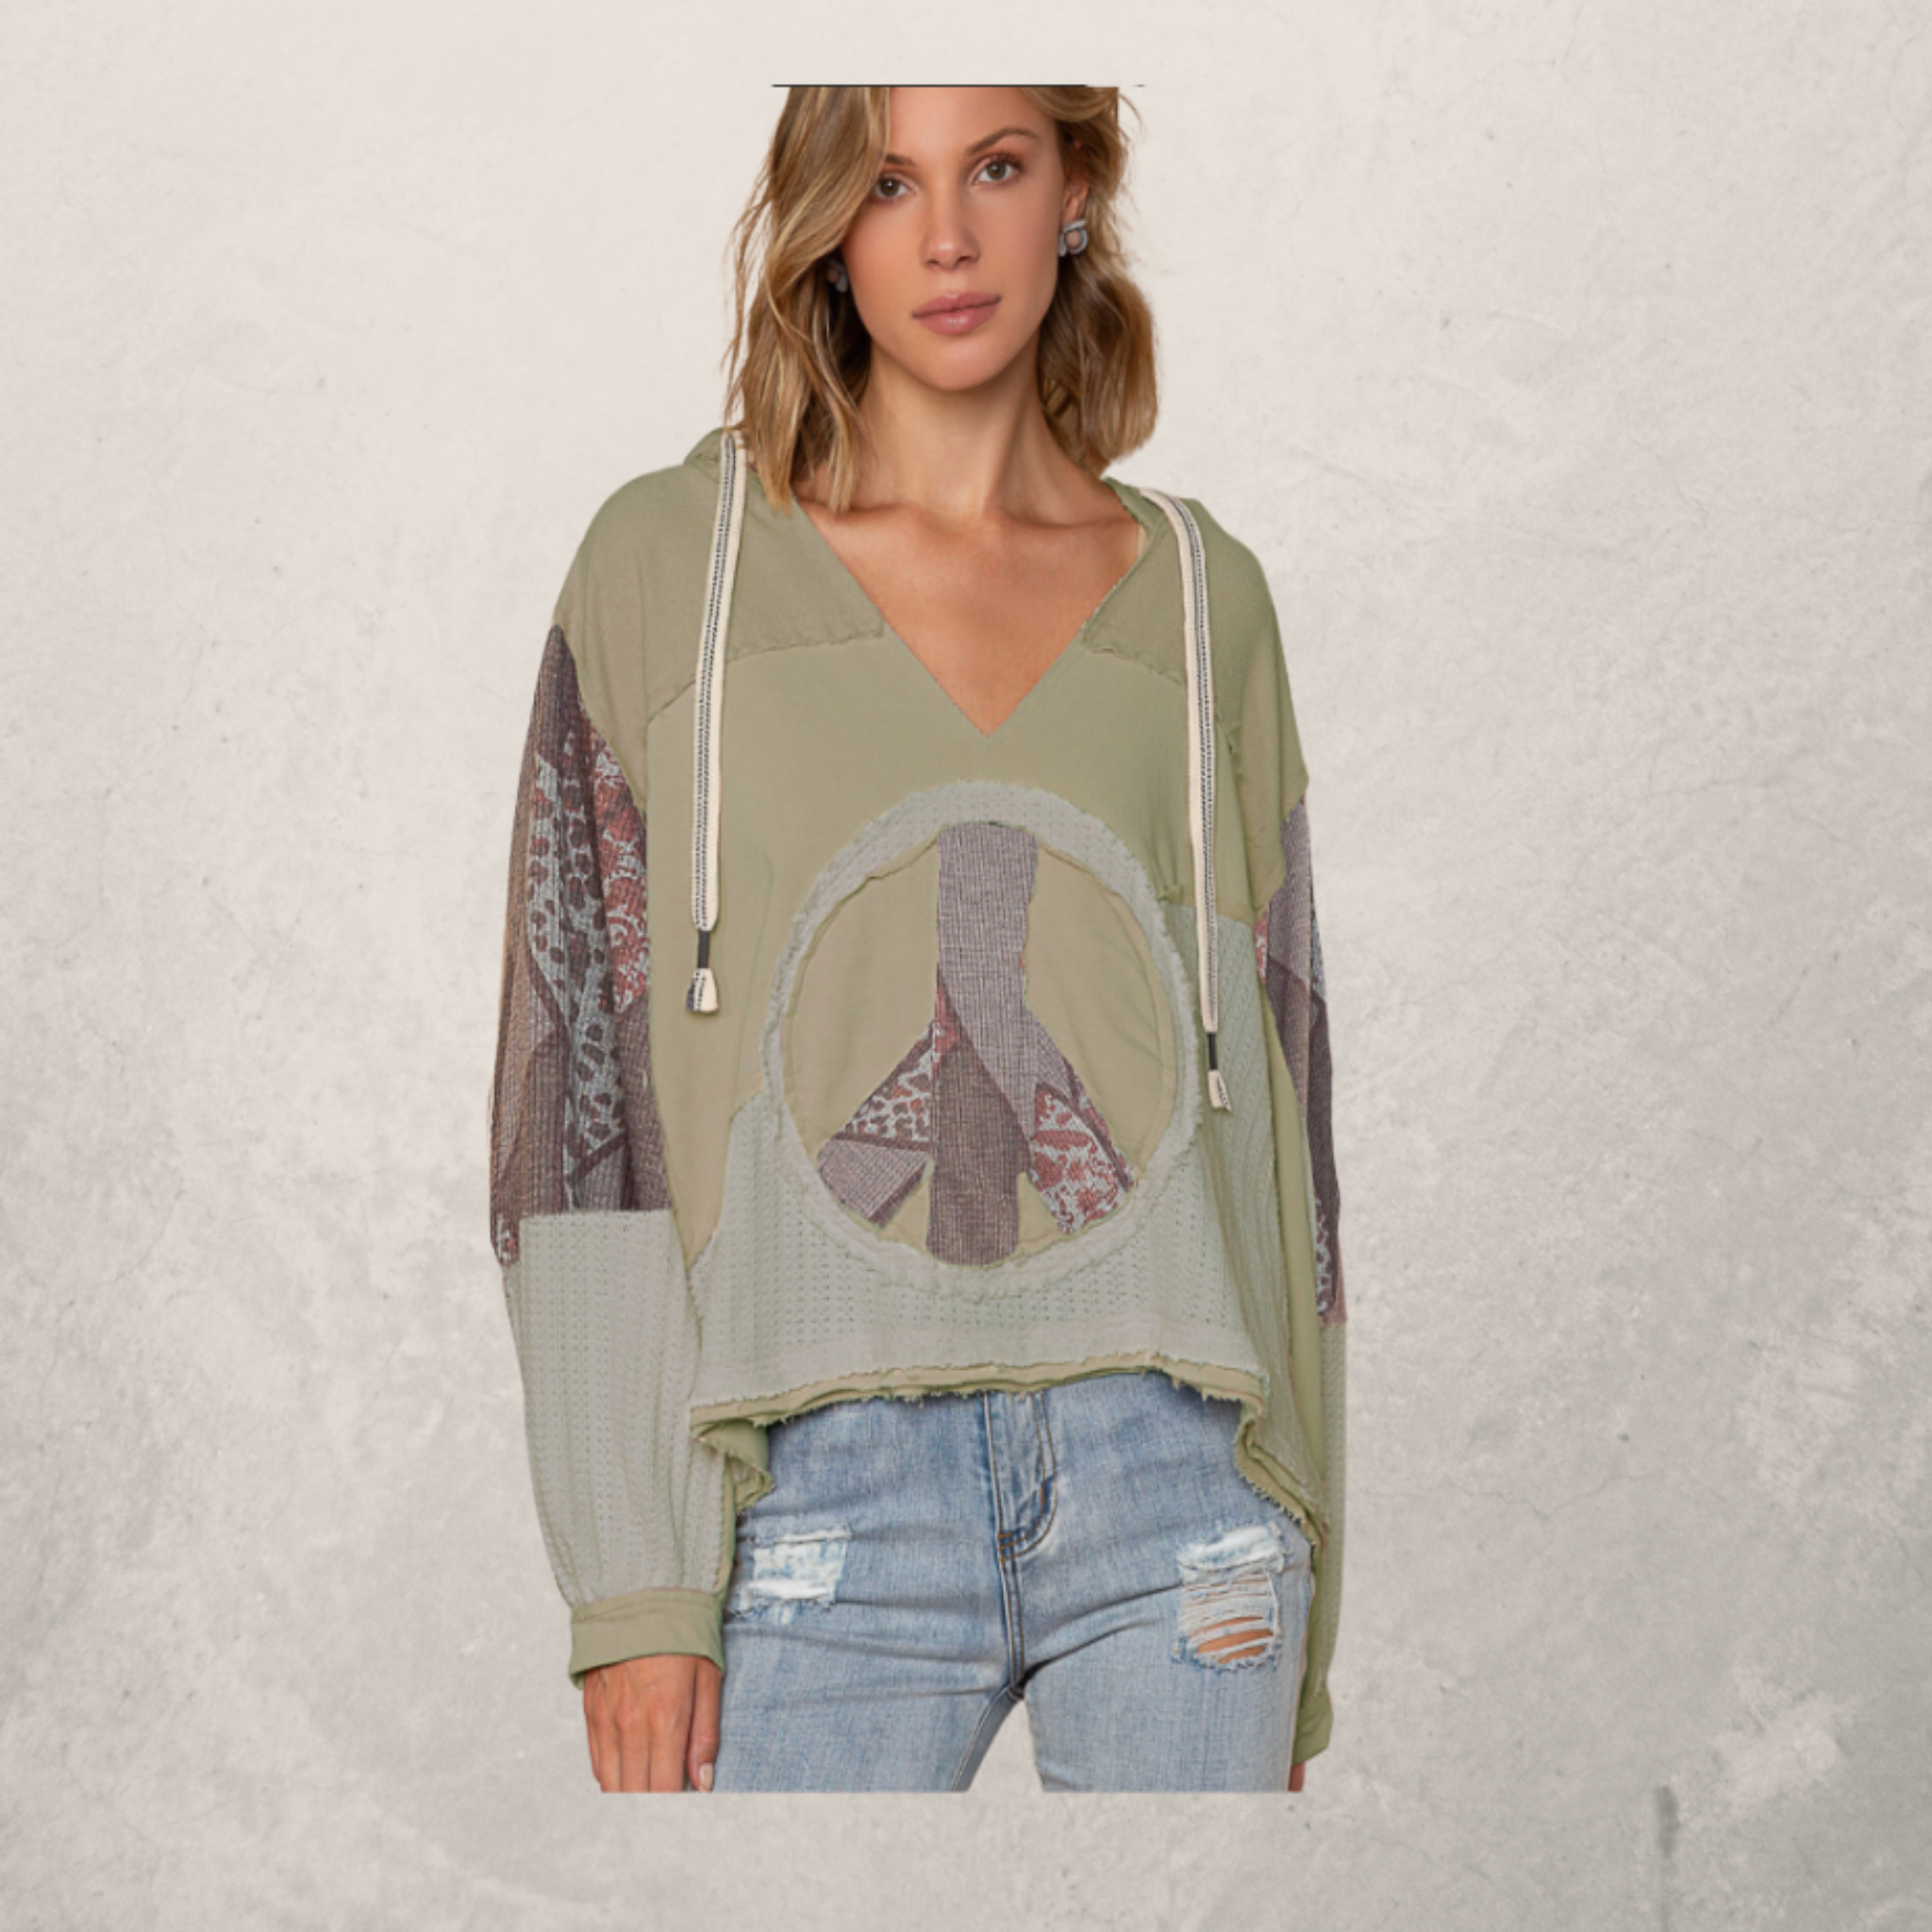 Oversized French Terry Top w/ Peace Emblem